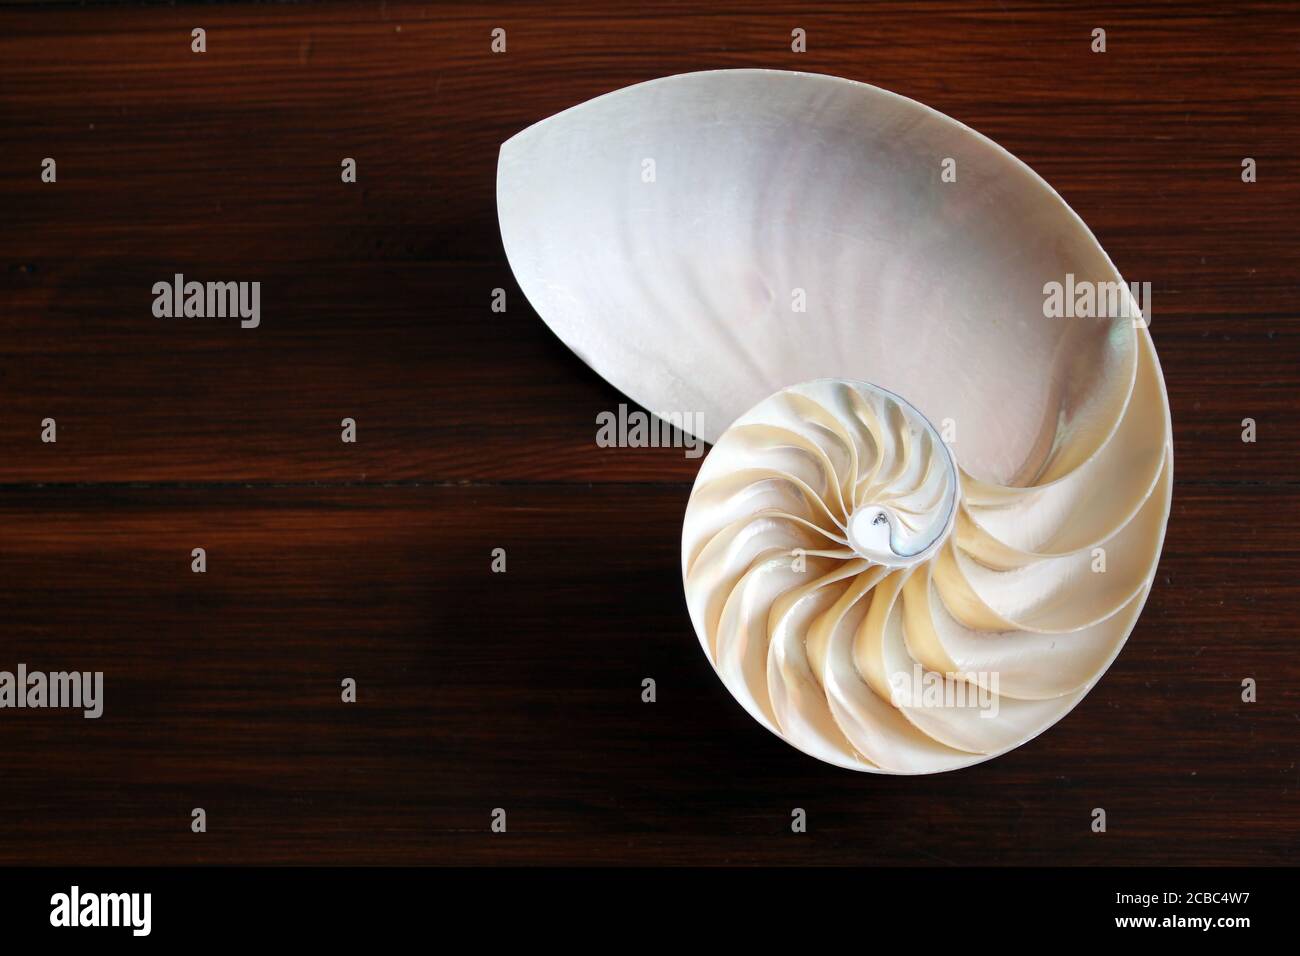 Shell Nautilus Fibonacci Section Spiral Pearl Symmetry Half Cross Golden Ratio Shell Structure Close Up Mother Pearl Pompilius Nautilus Shell Stock Photo Alamy